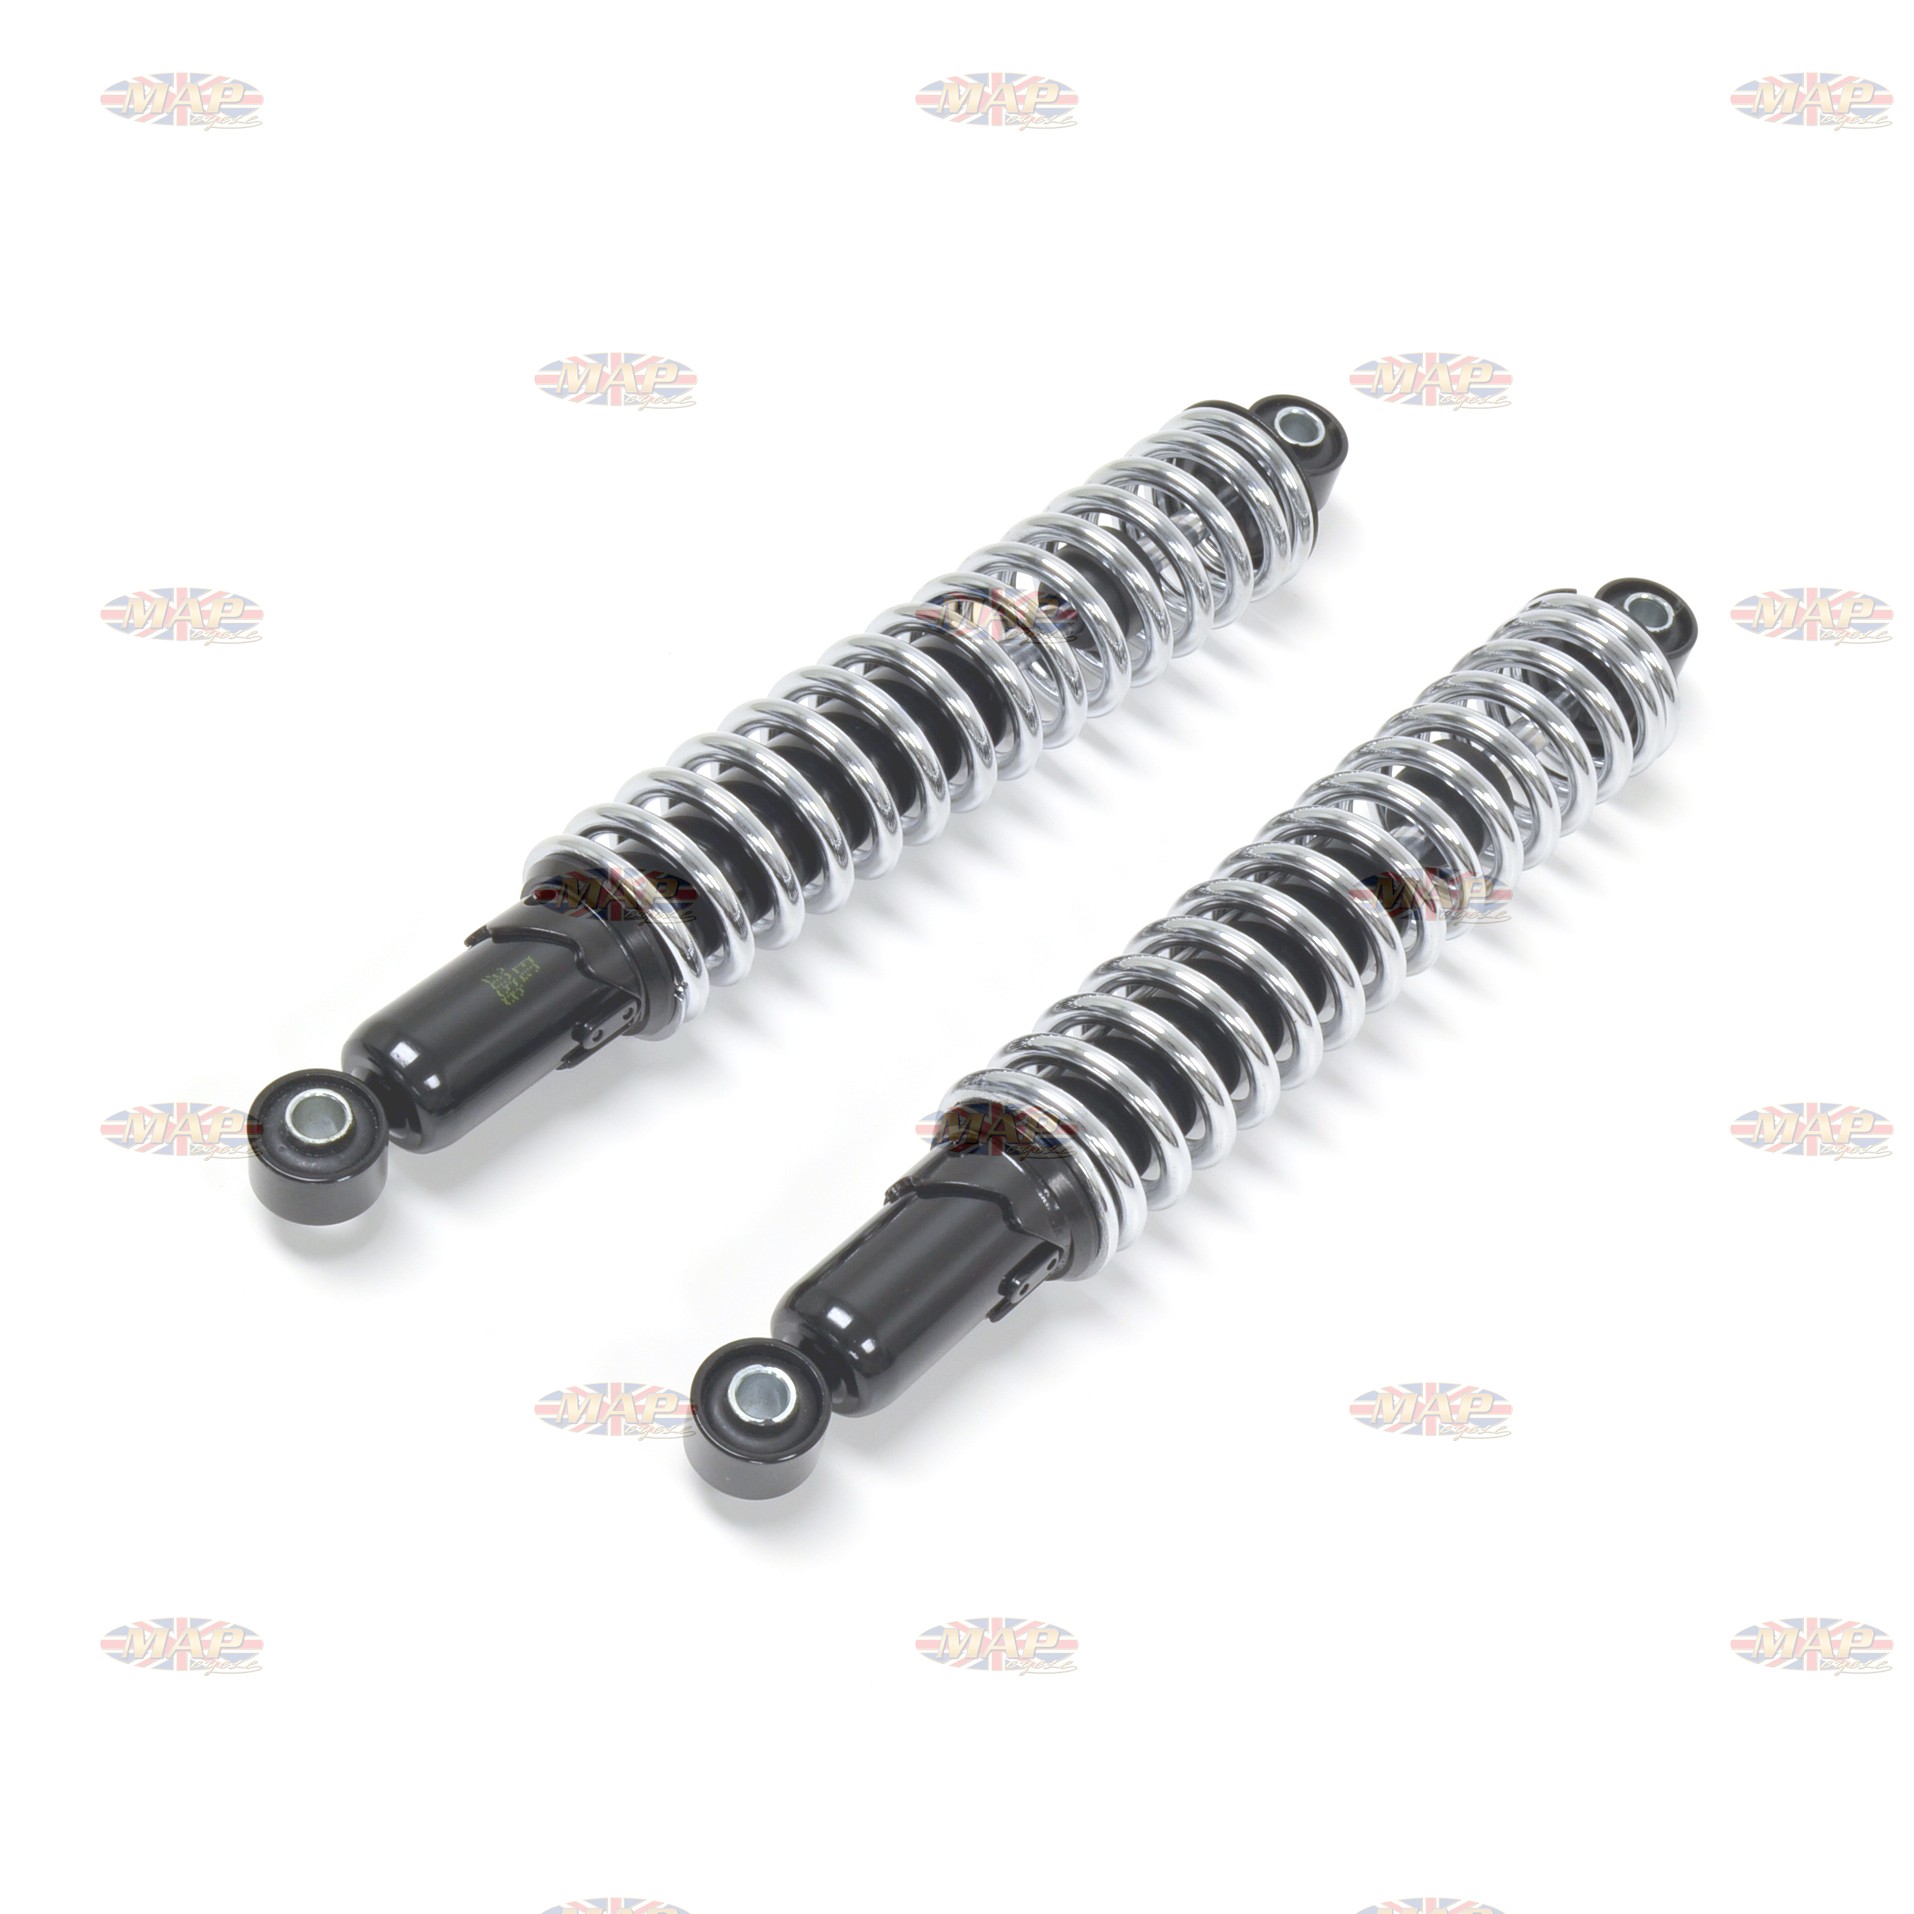 TR6 Girling Type Shock Absorber Triumph T120 